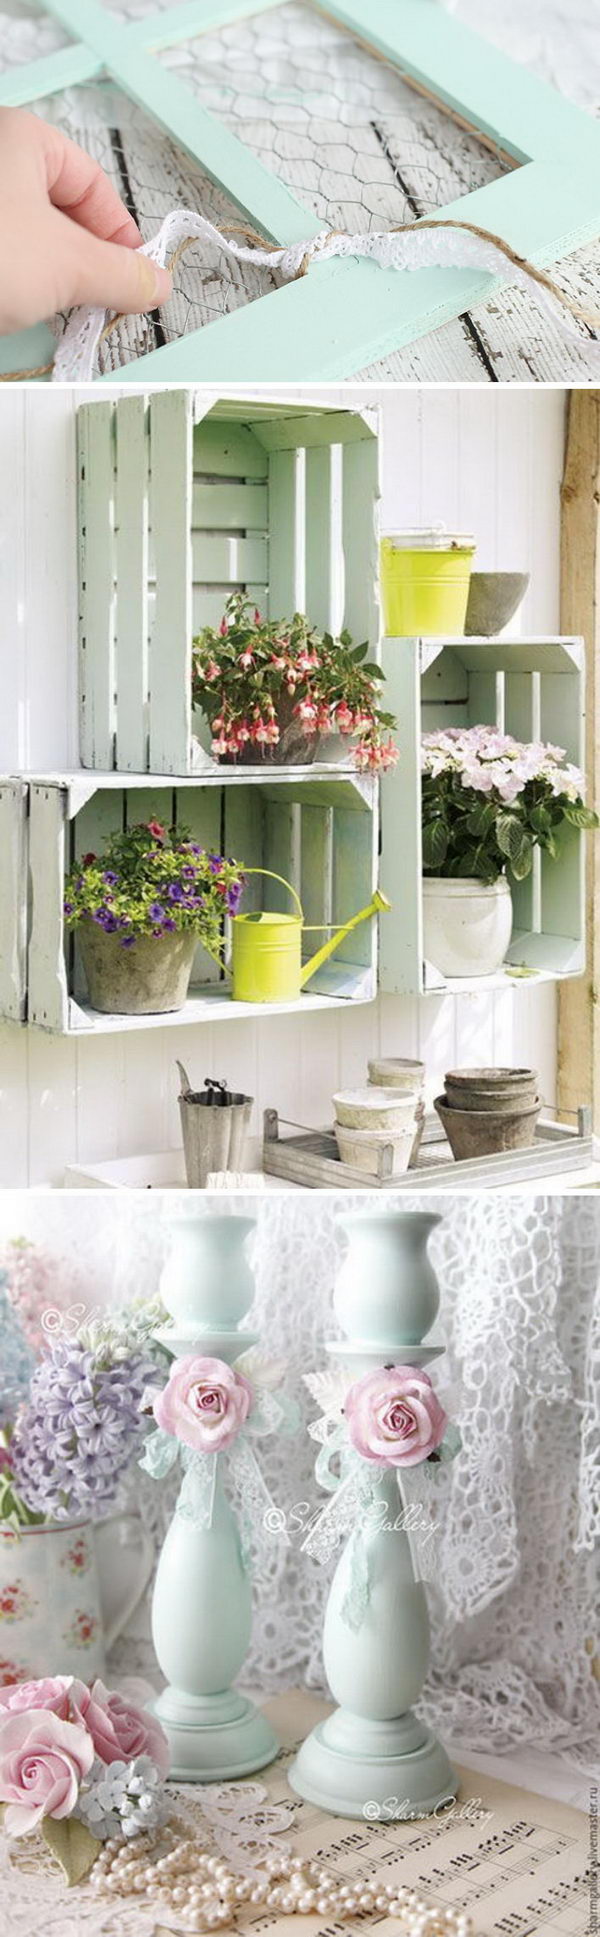 Awesome Shabby Chic Decor DIY Ideas & Projects 